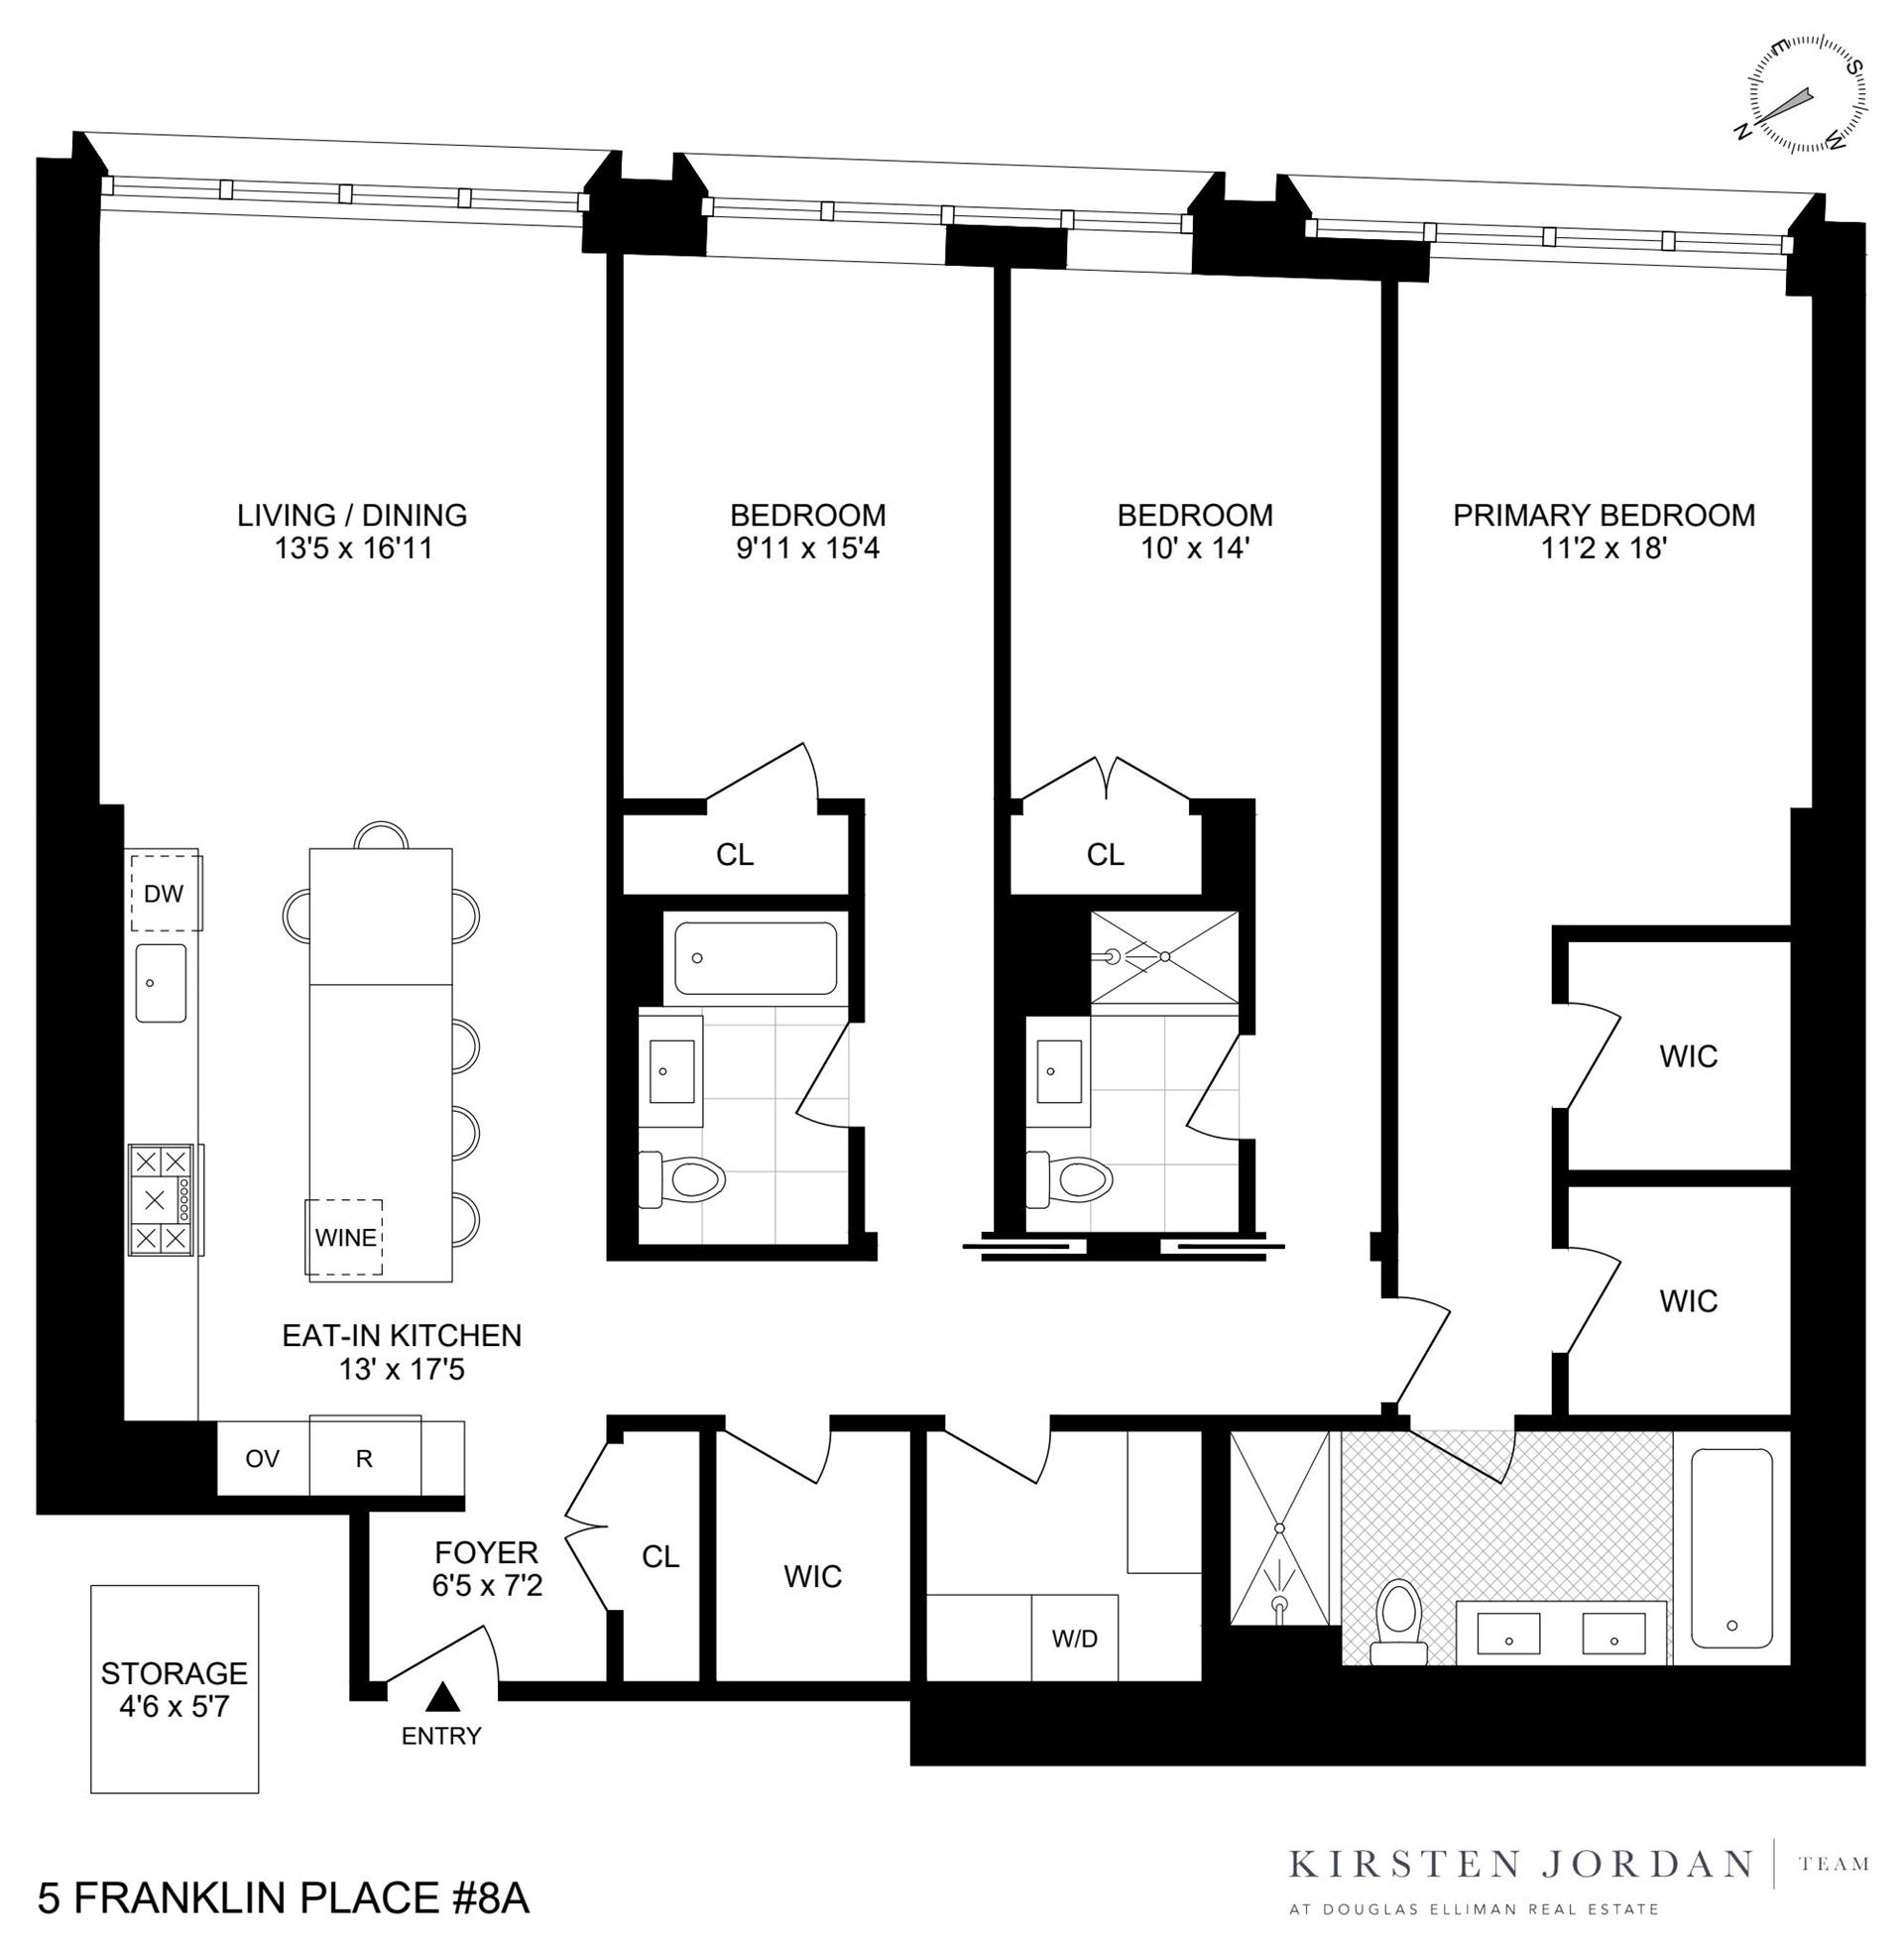 Floorplan for 5 Franklin Place, 8A